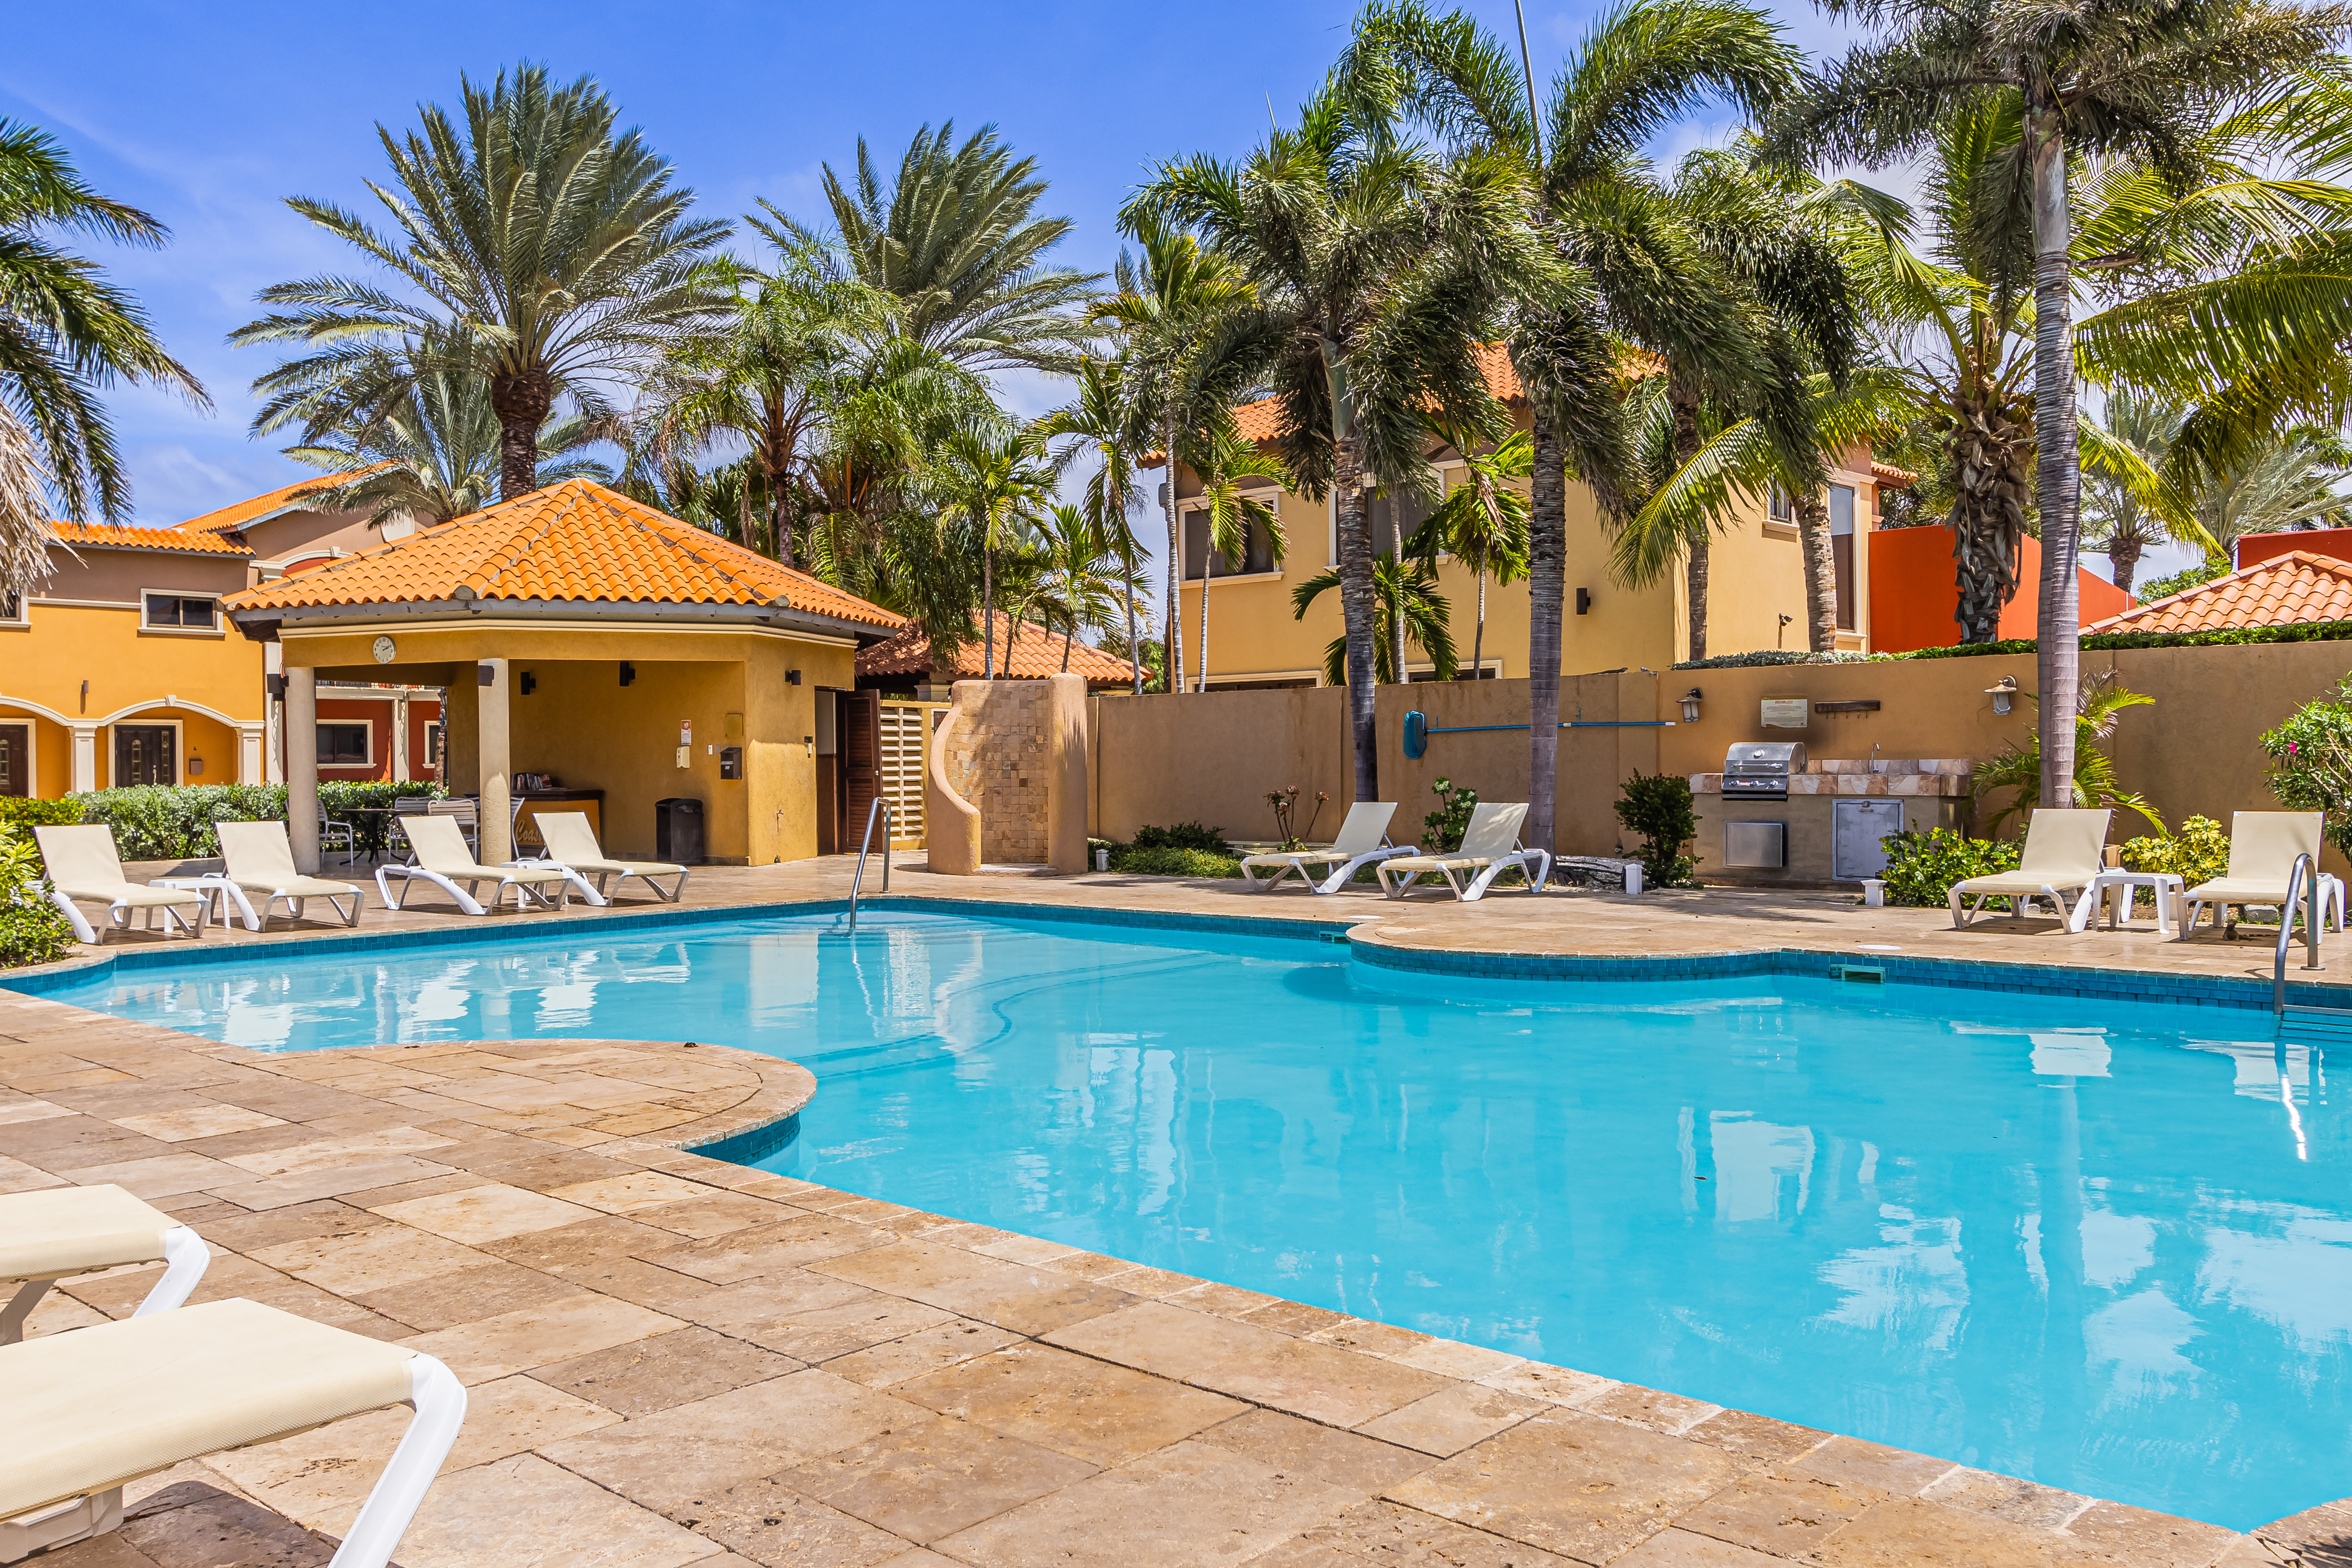 Gold Coast shared pool area, perfect for relaxing and socializing.